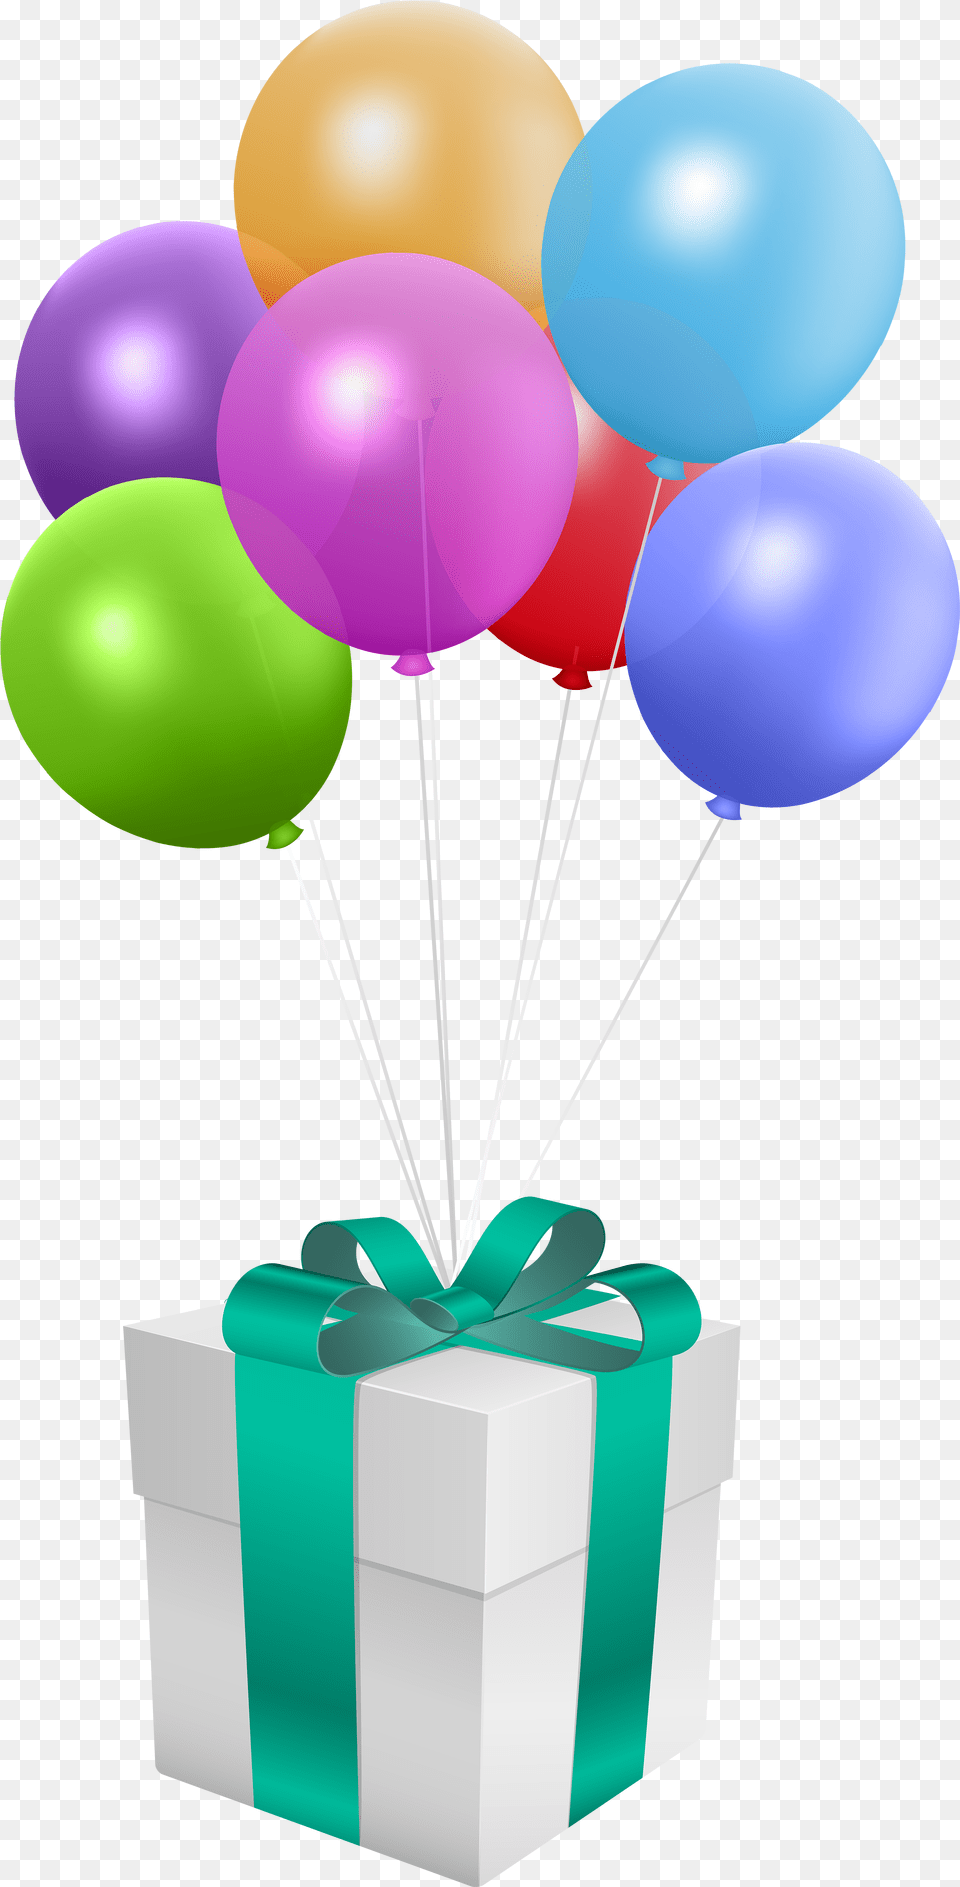 Balloon Birthday Balloons Gift Box With Balloons Free Png Download